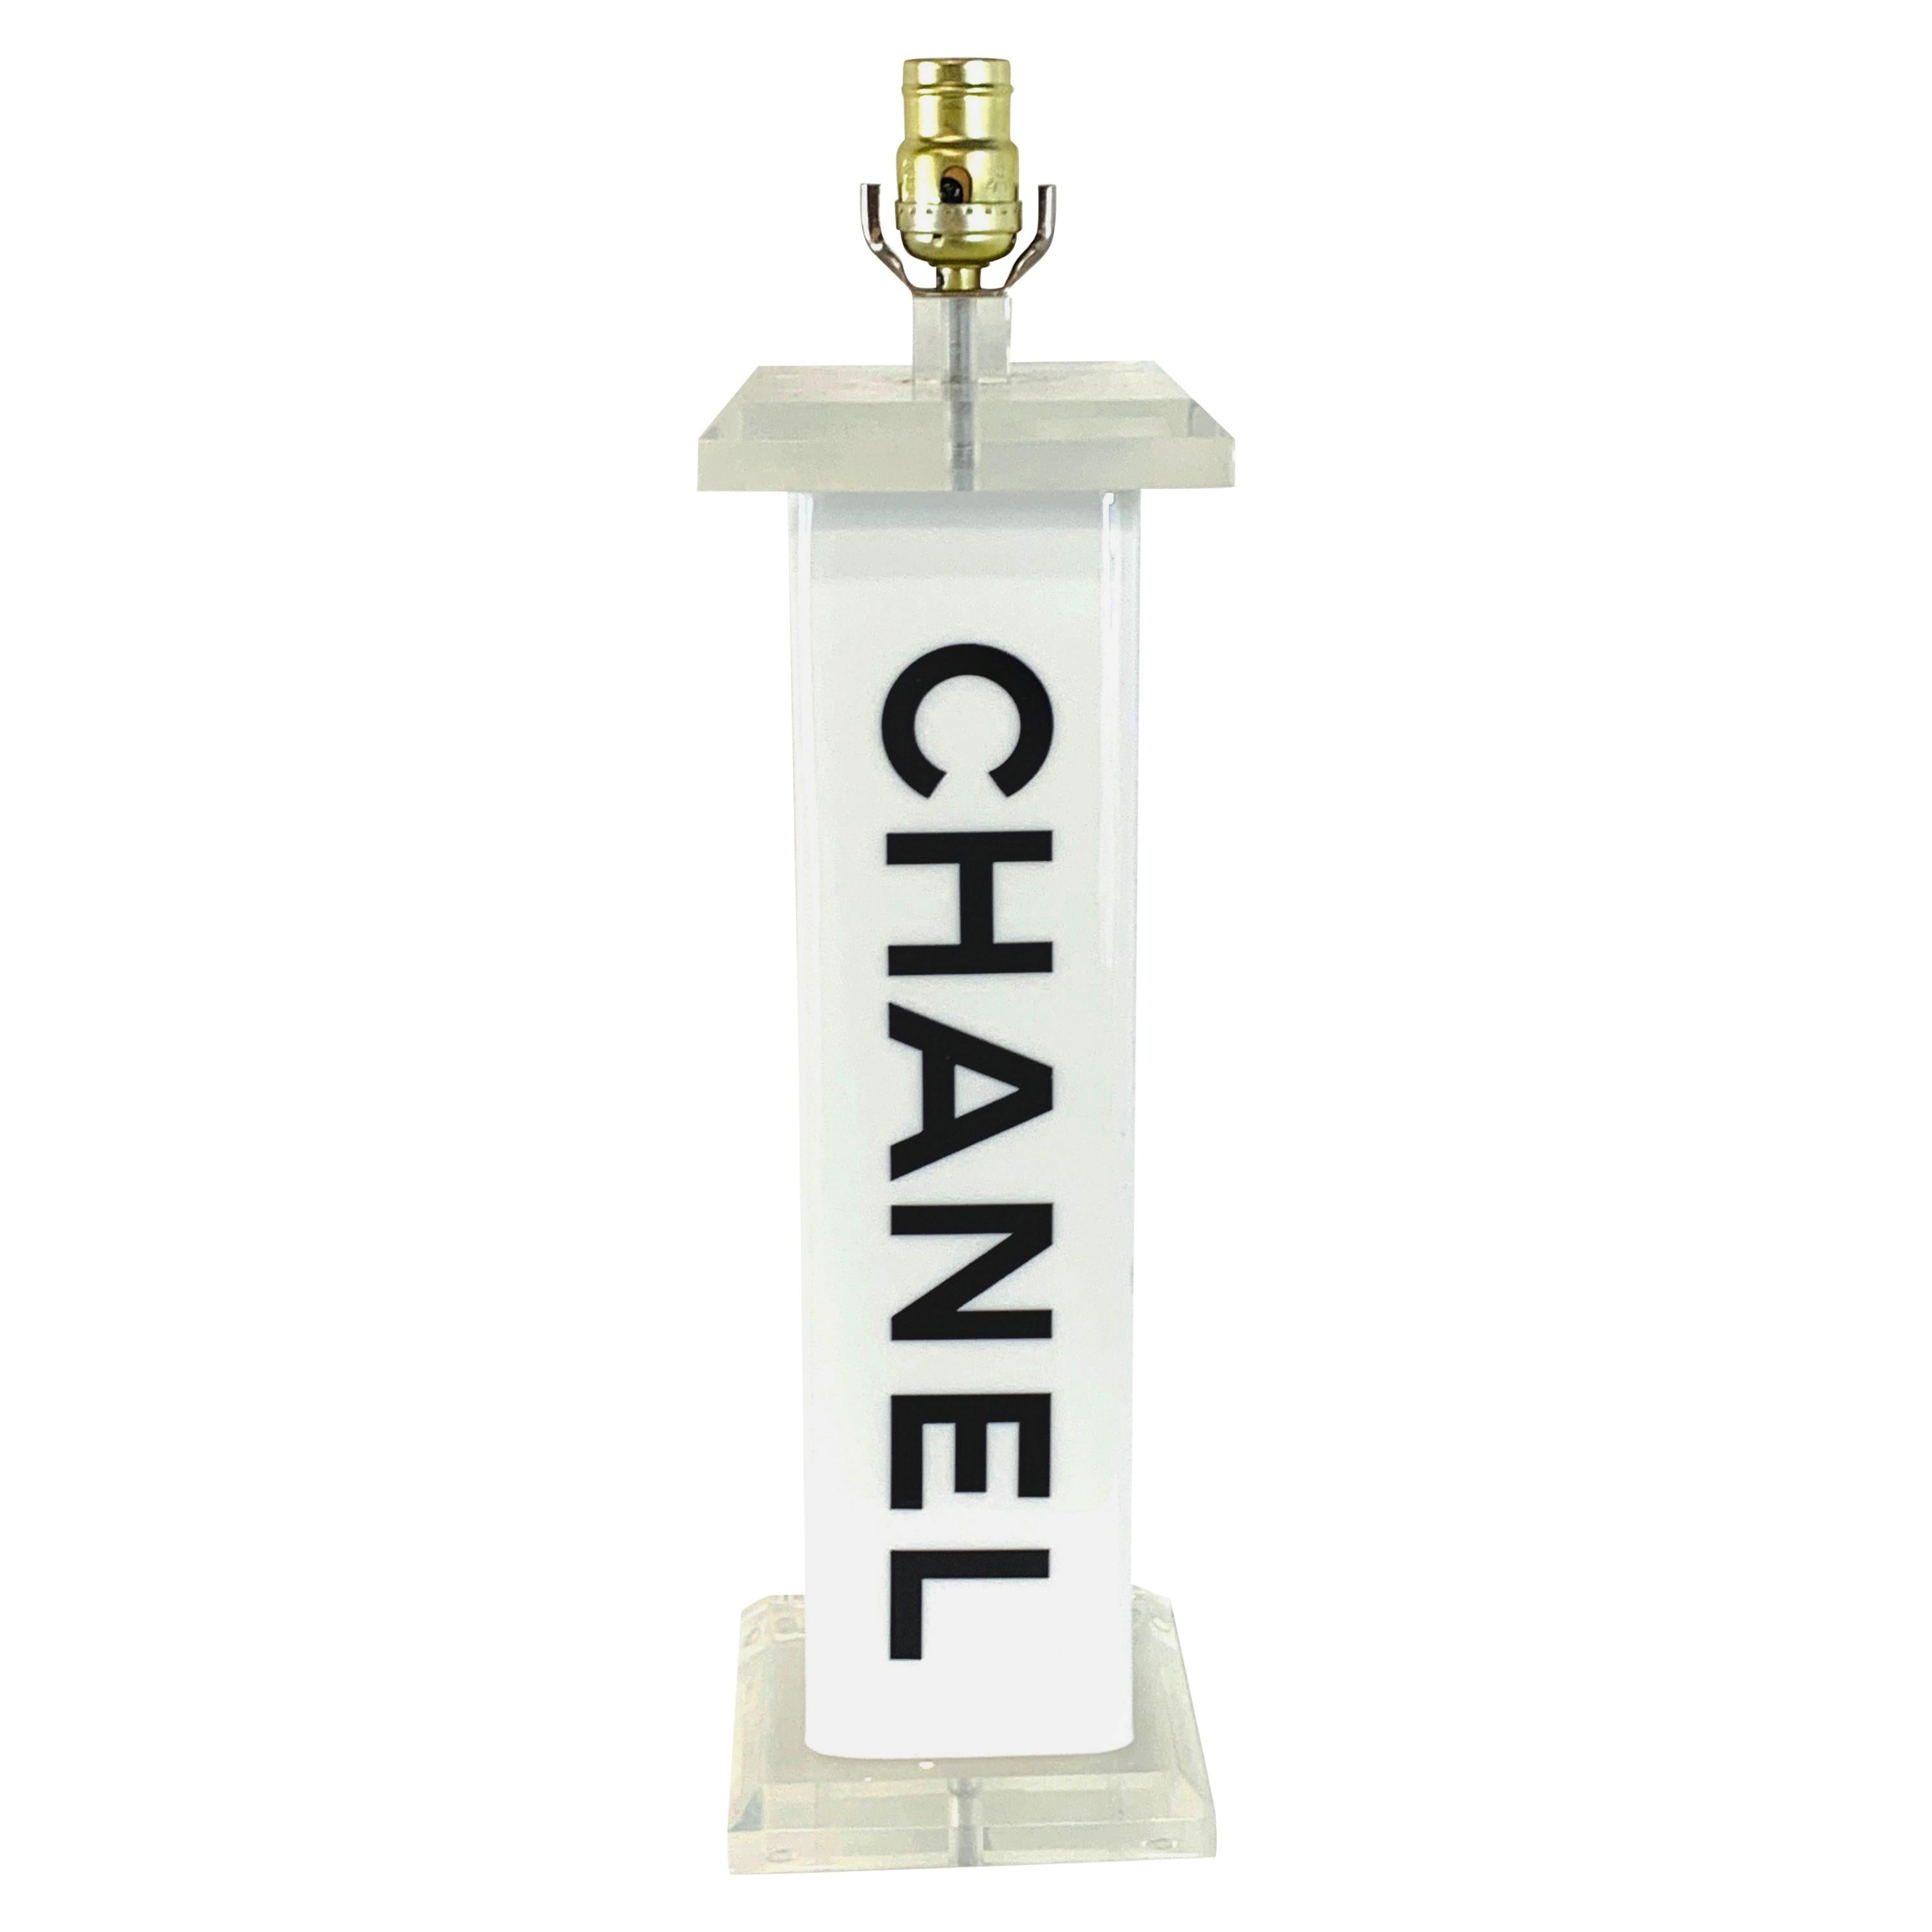 Vintage Chanel Store Display Lucite Lamp